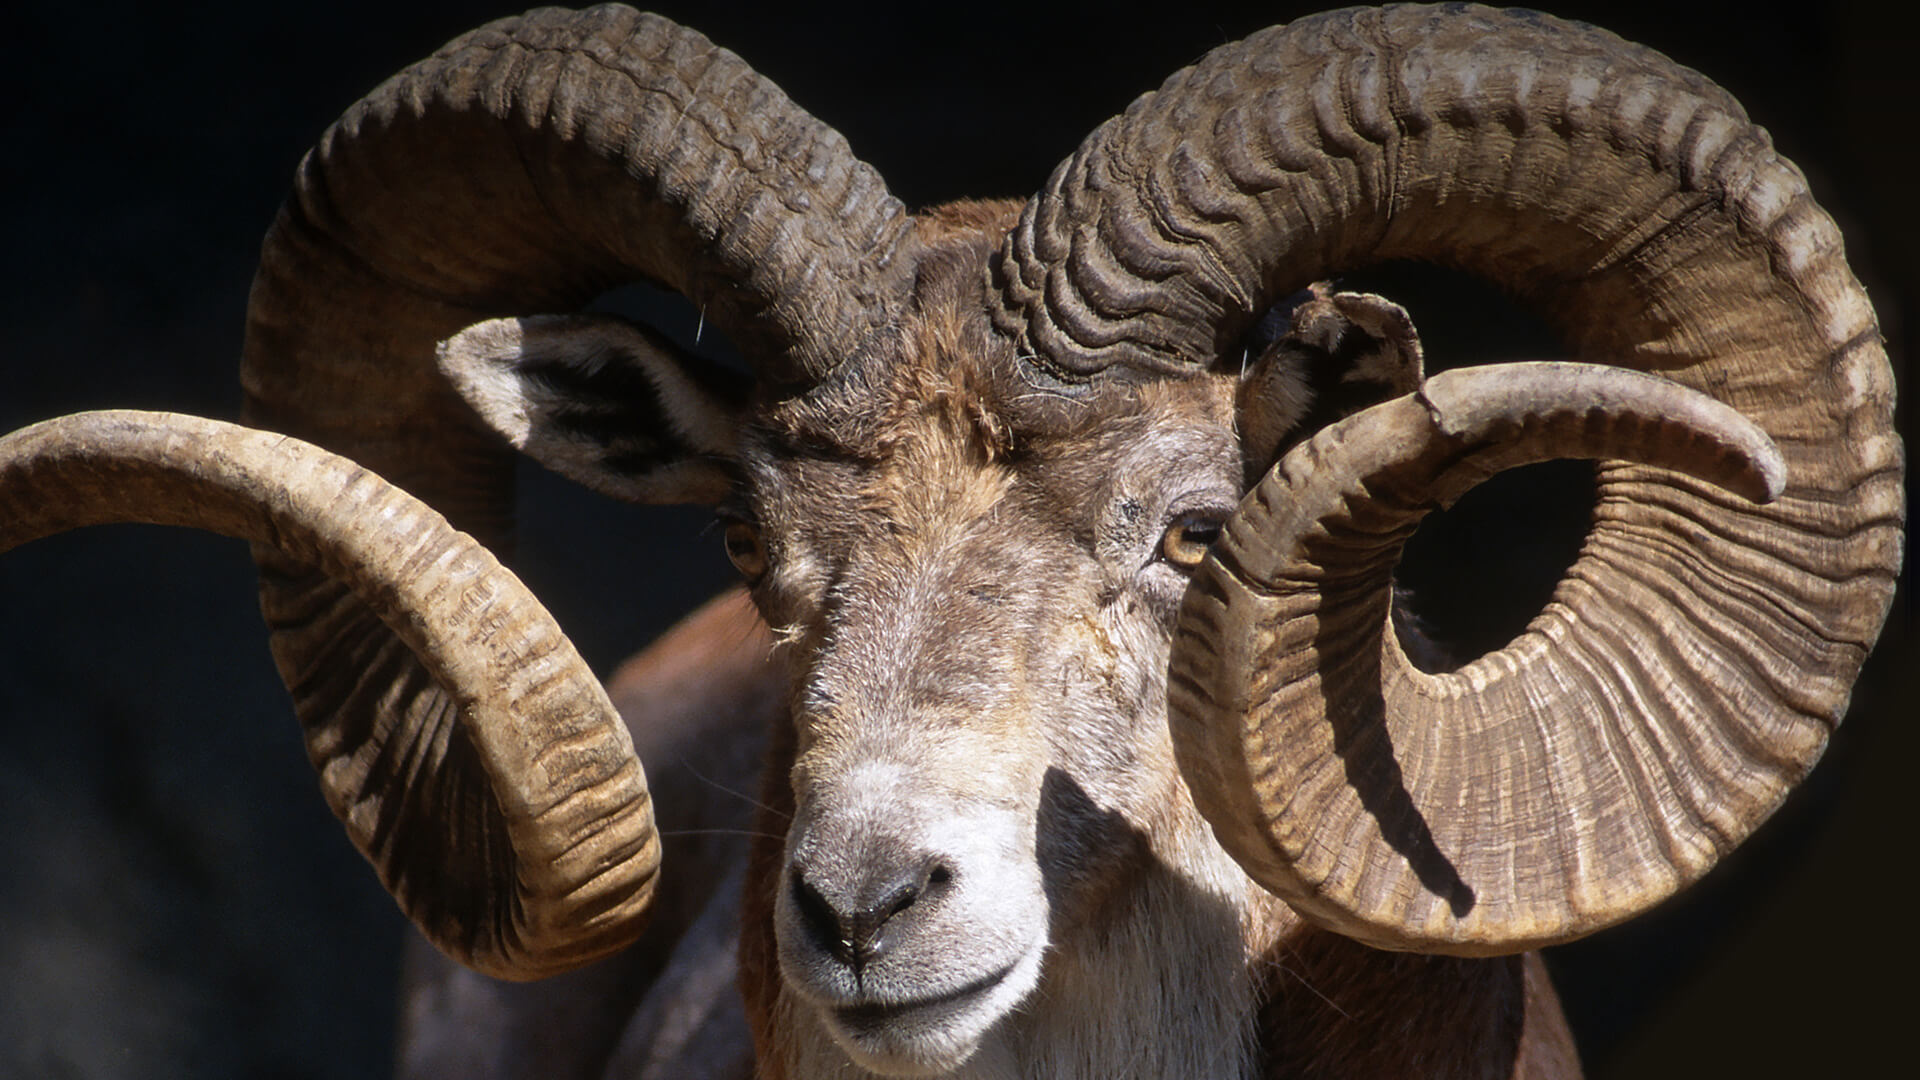 Goat and Sheep | San Diego Zoo Animals & Plants